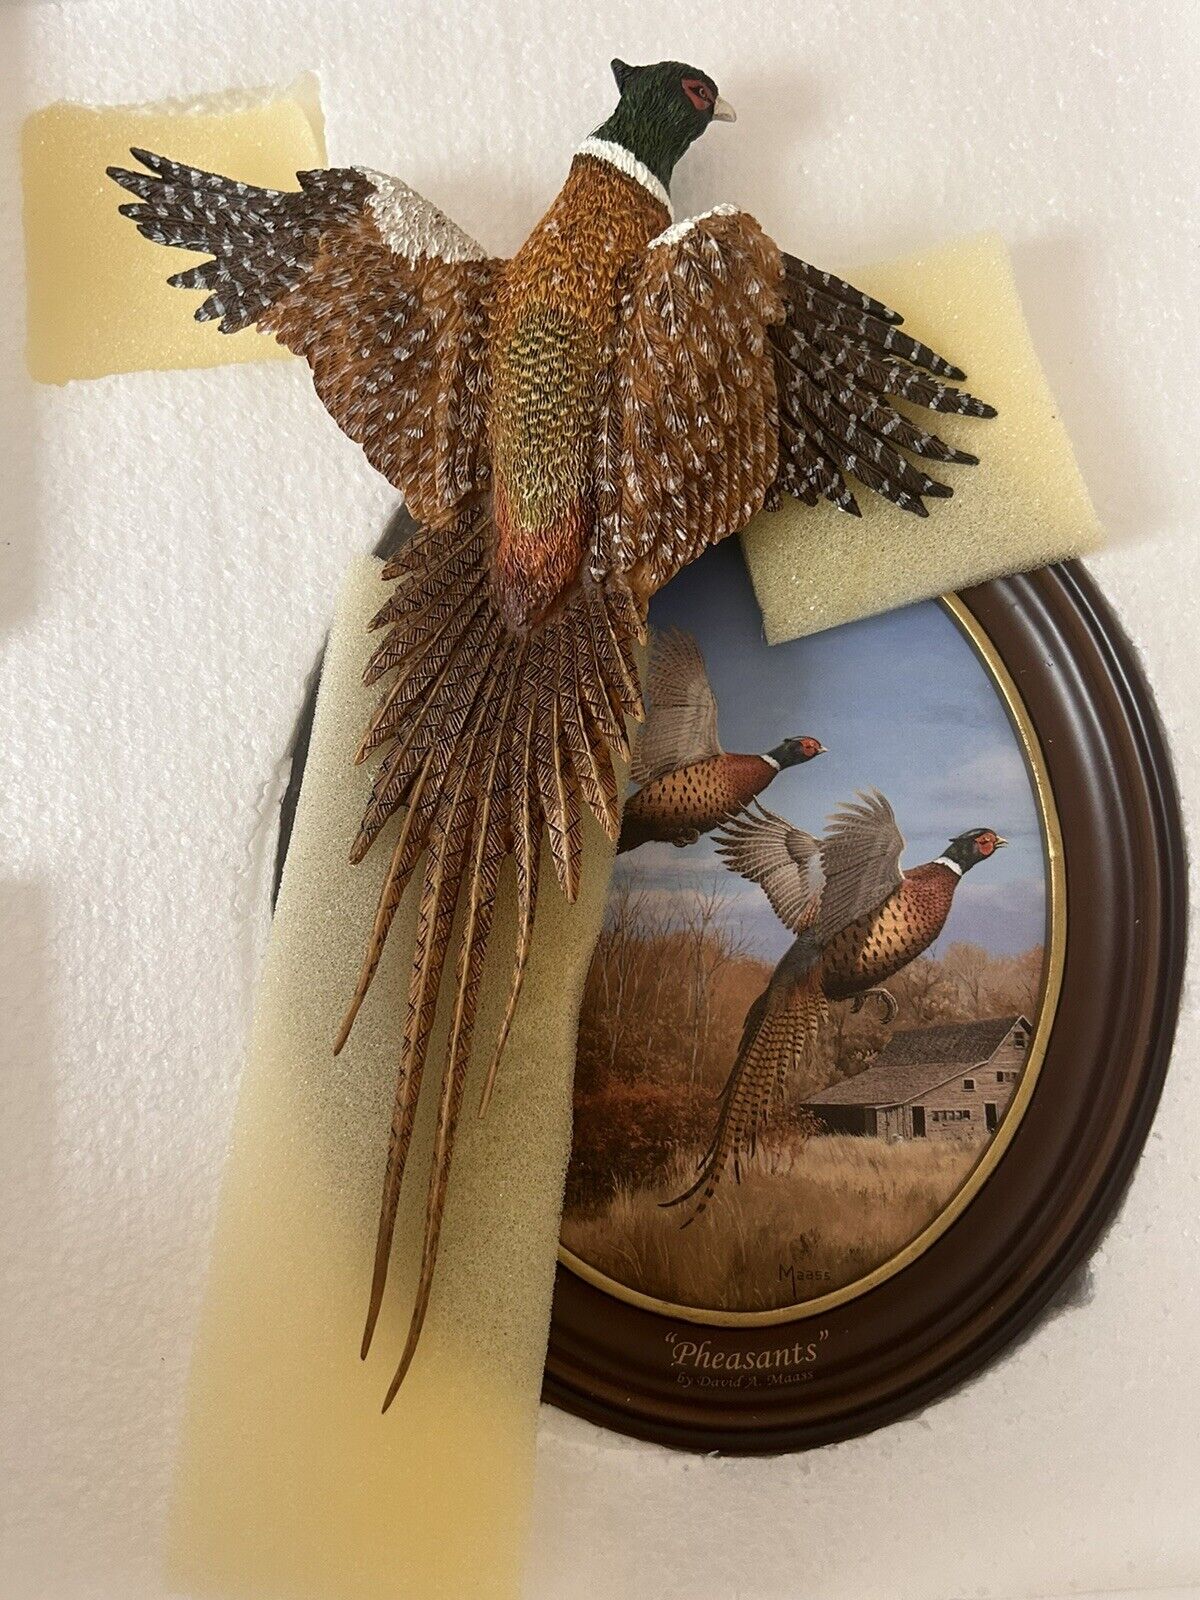 The Bradford Exchange Limited Edition David A. Maass Plate “Pheasants”